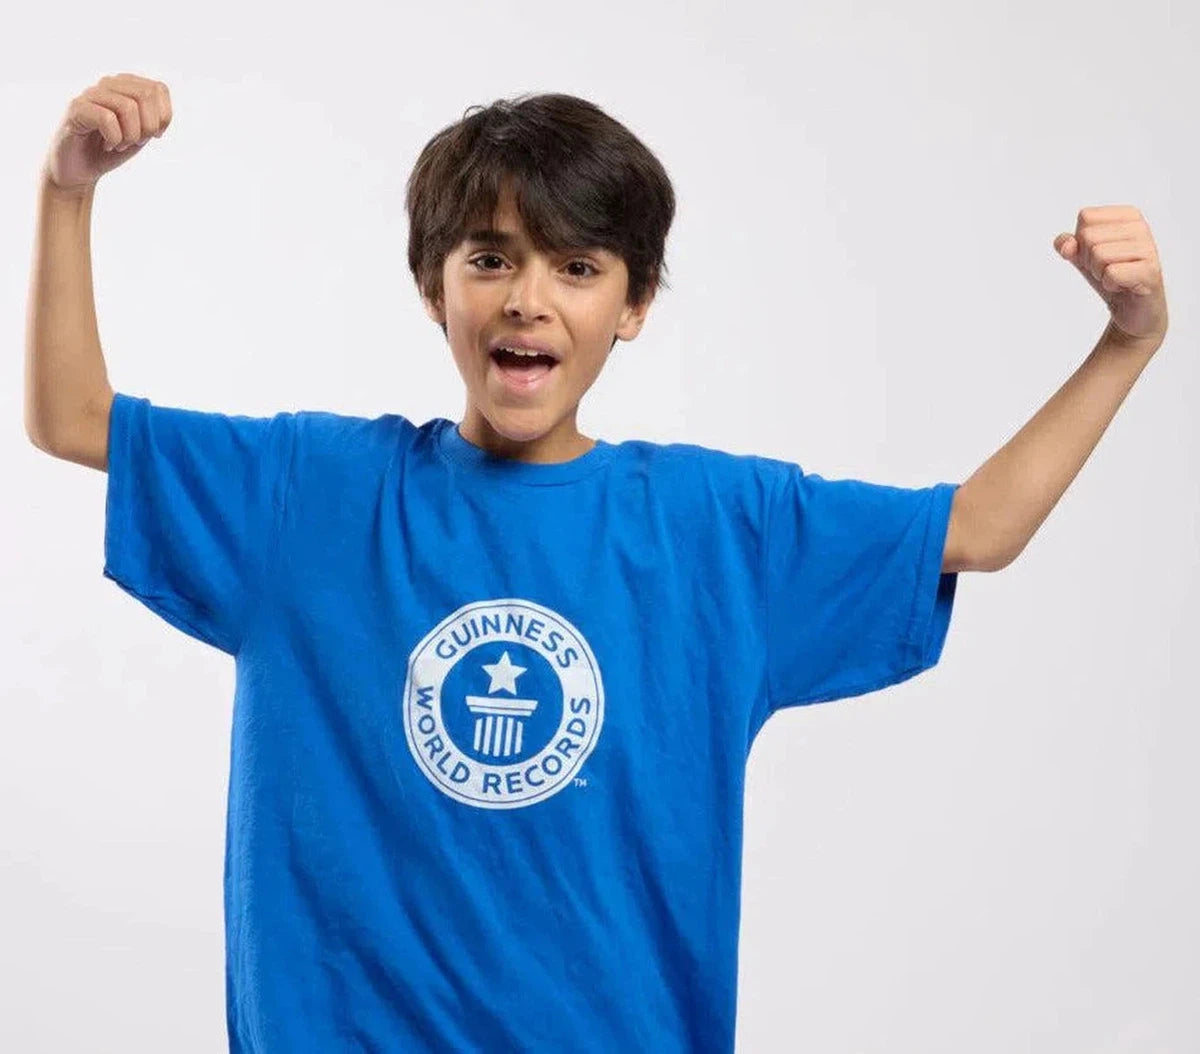 Kids T-shirt with white logo-Guinness World Records